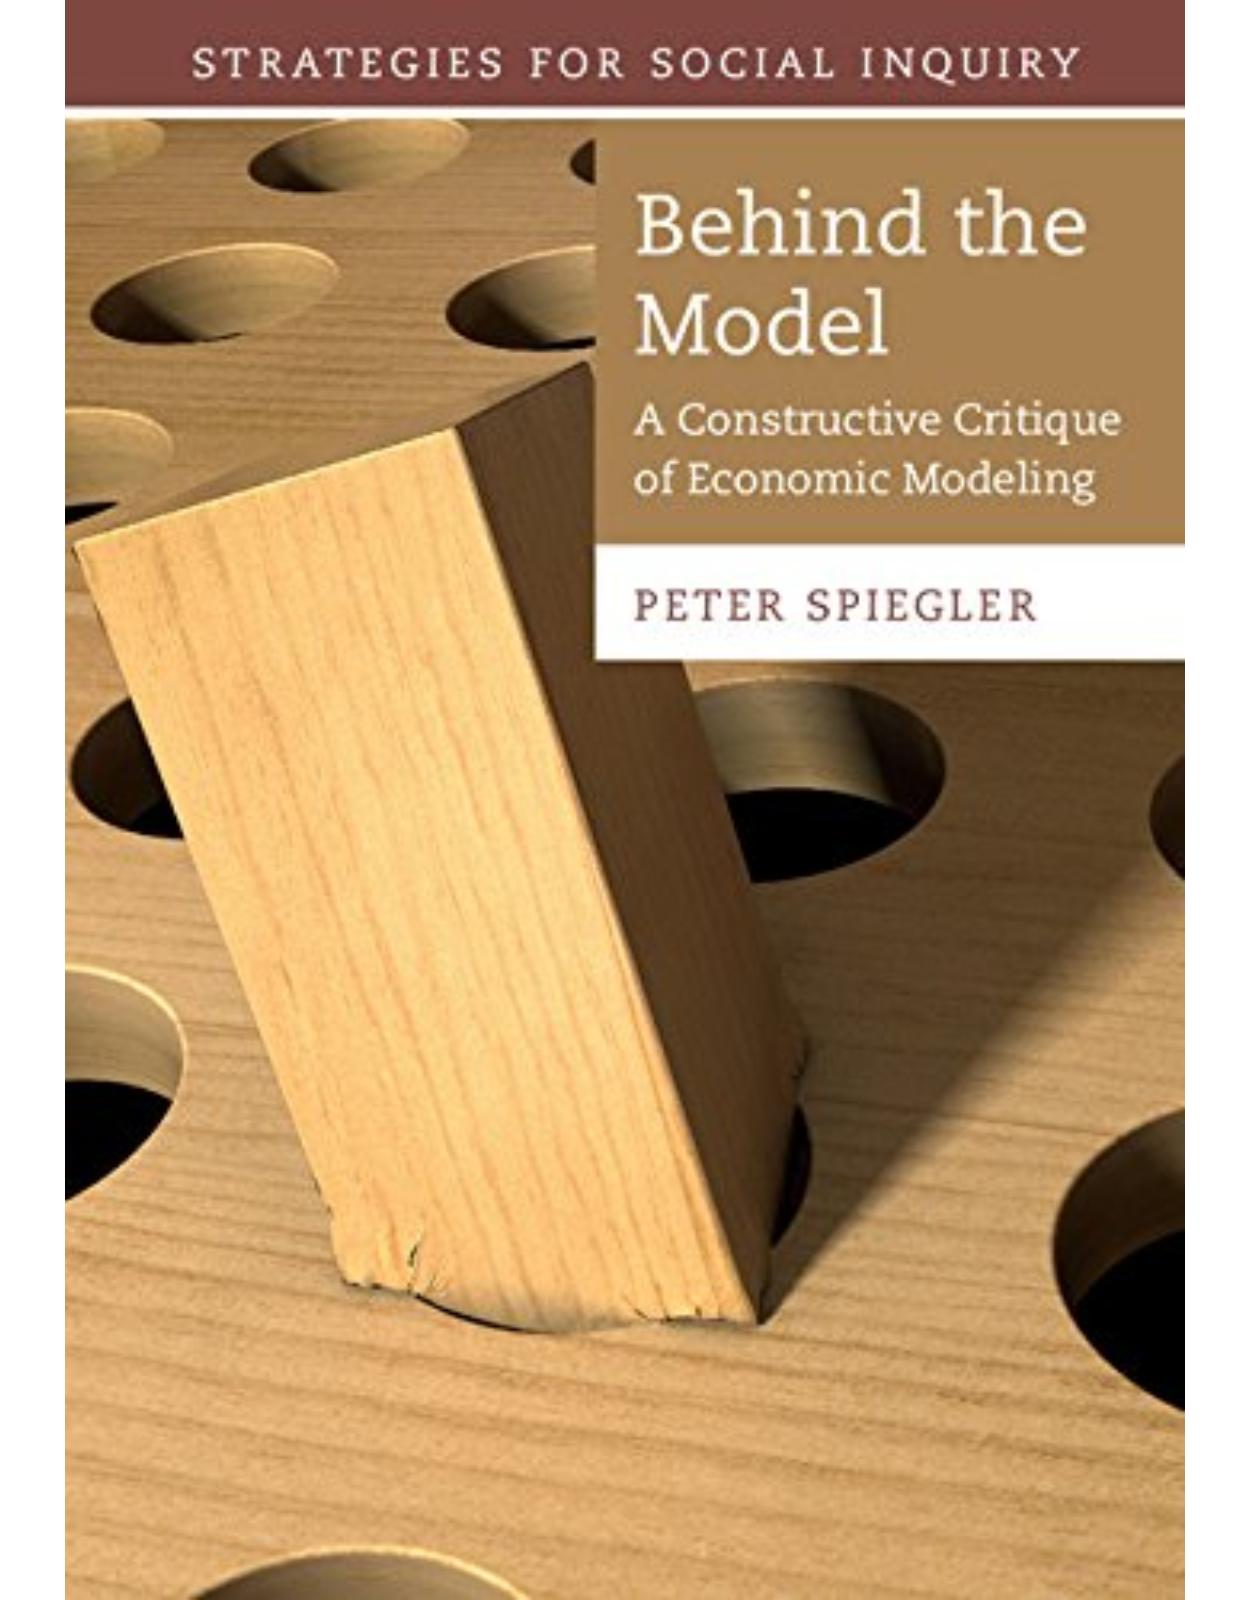 Behind the Model: A Constructive Critique of Economic Modeling (Strategies for Social Inquiry)